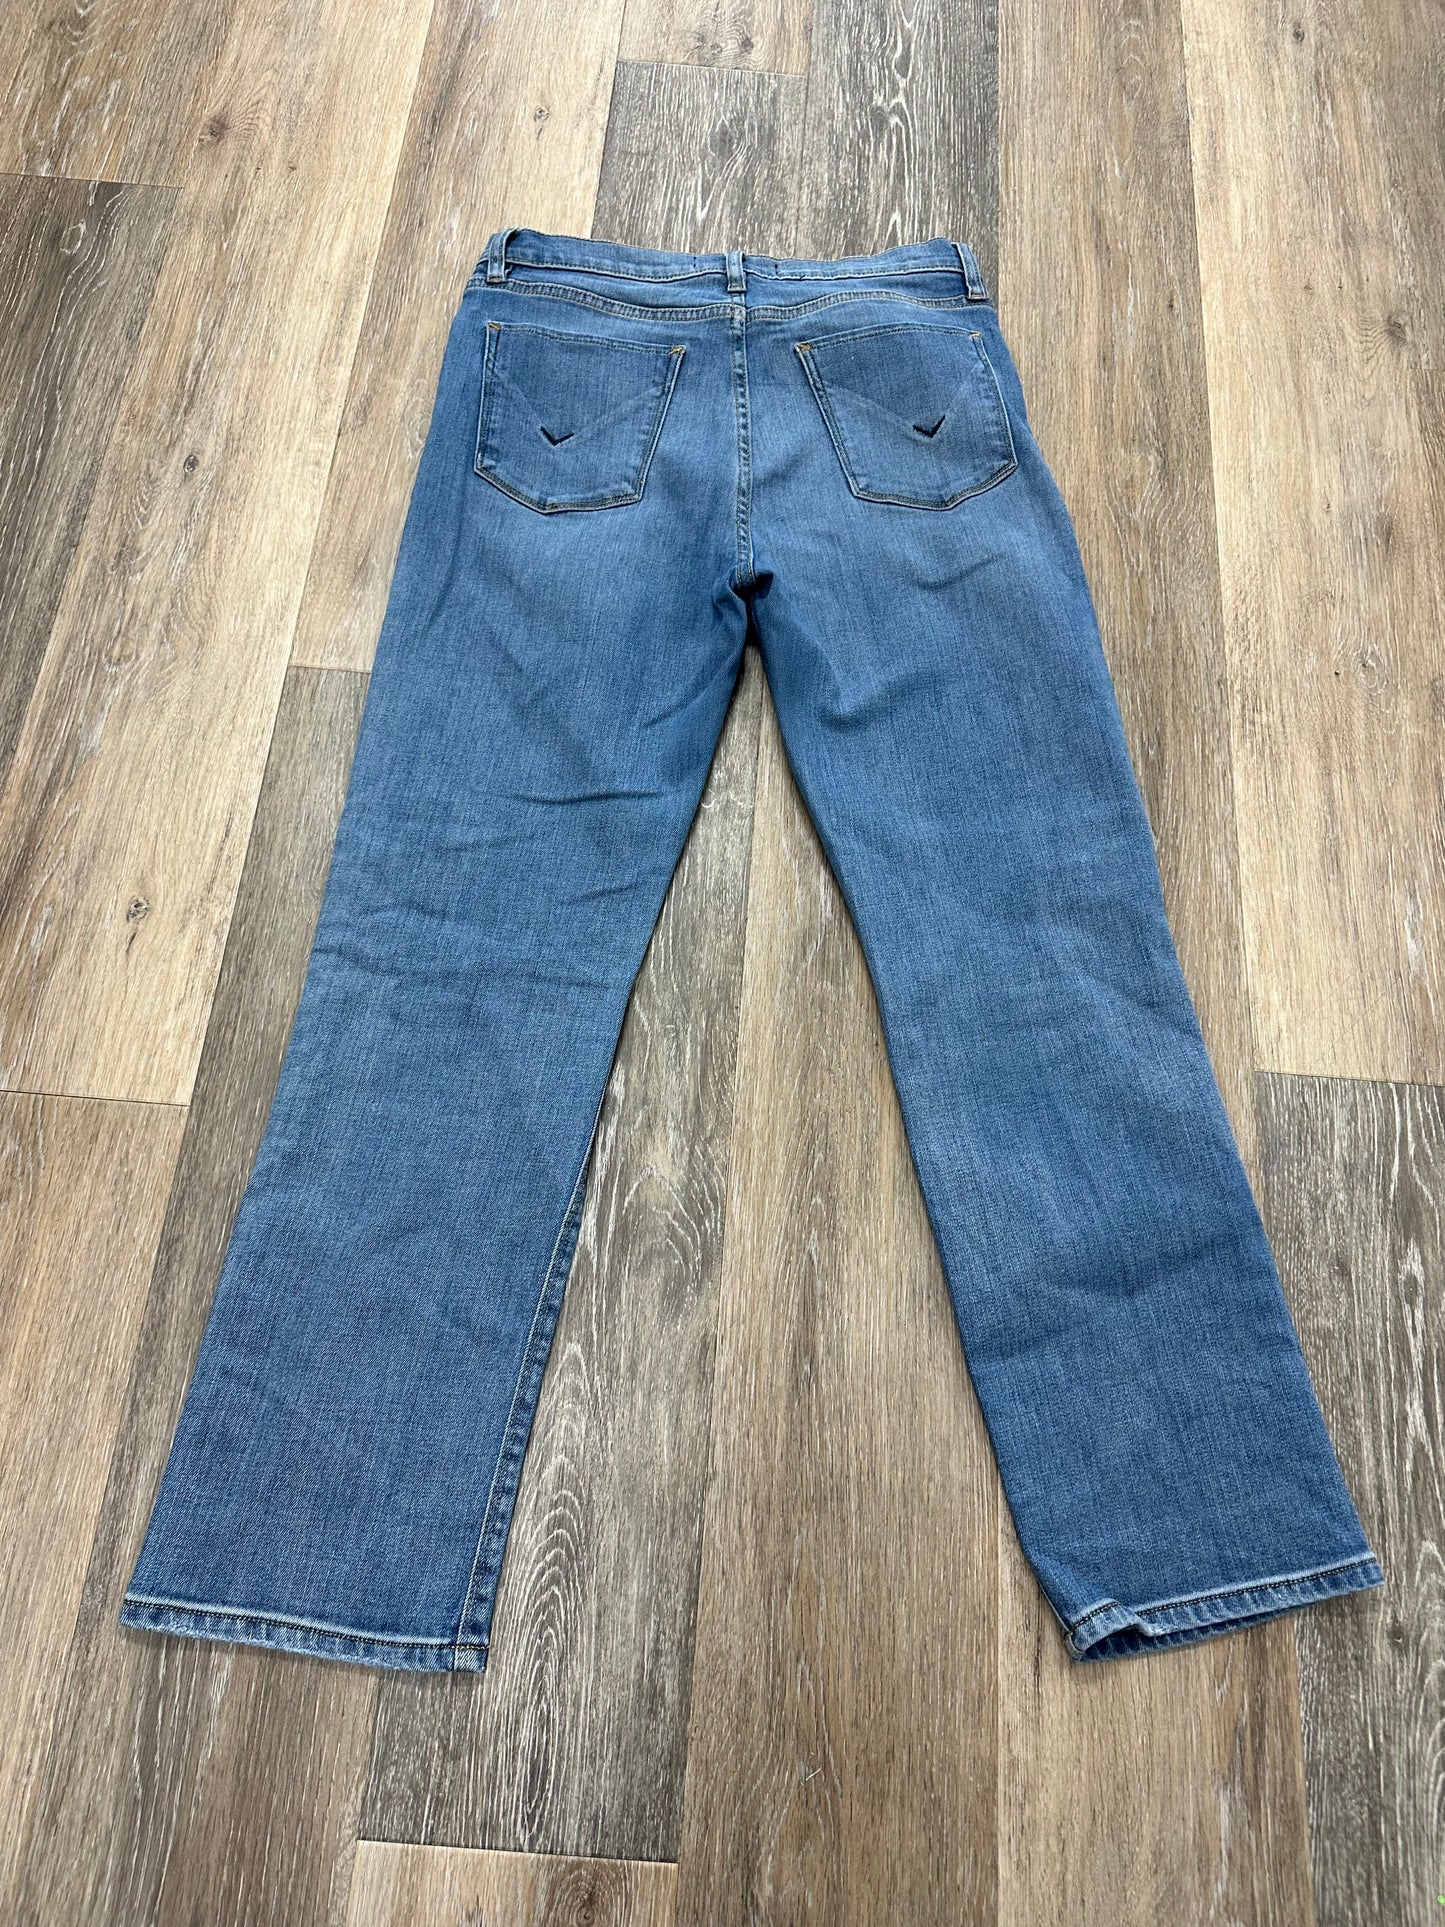 Jeans Straight By Hudson  Size: 6